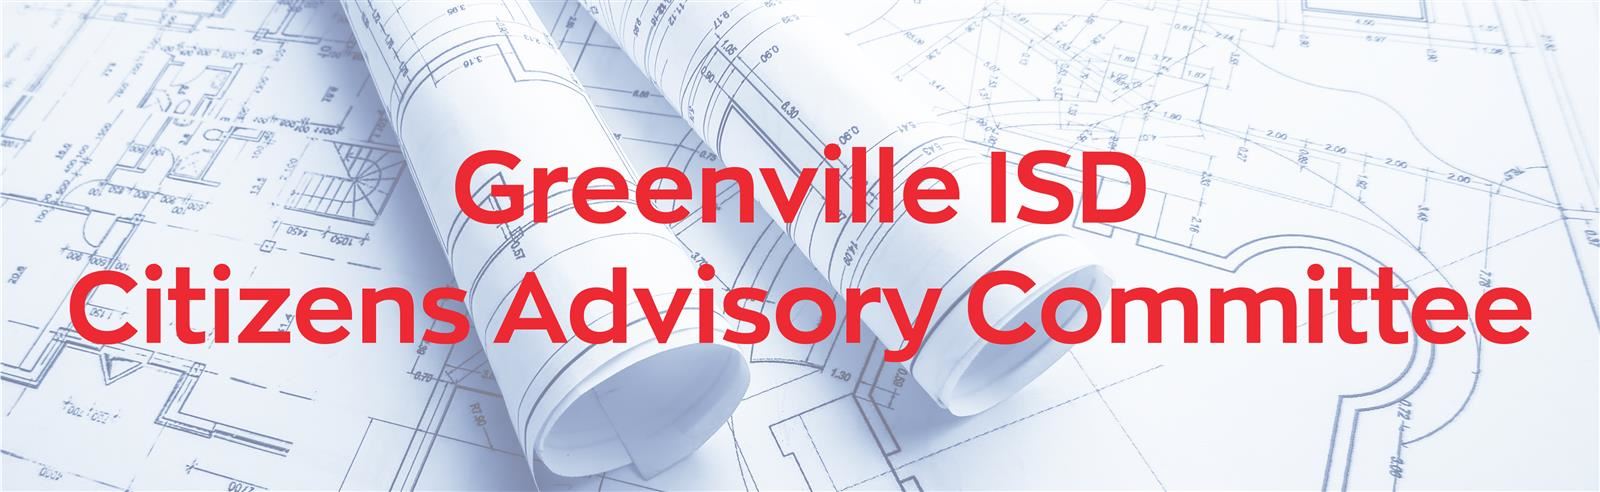 Greenville ISD Citizens Advisory Committee LogoGraphic